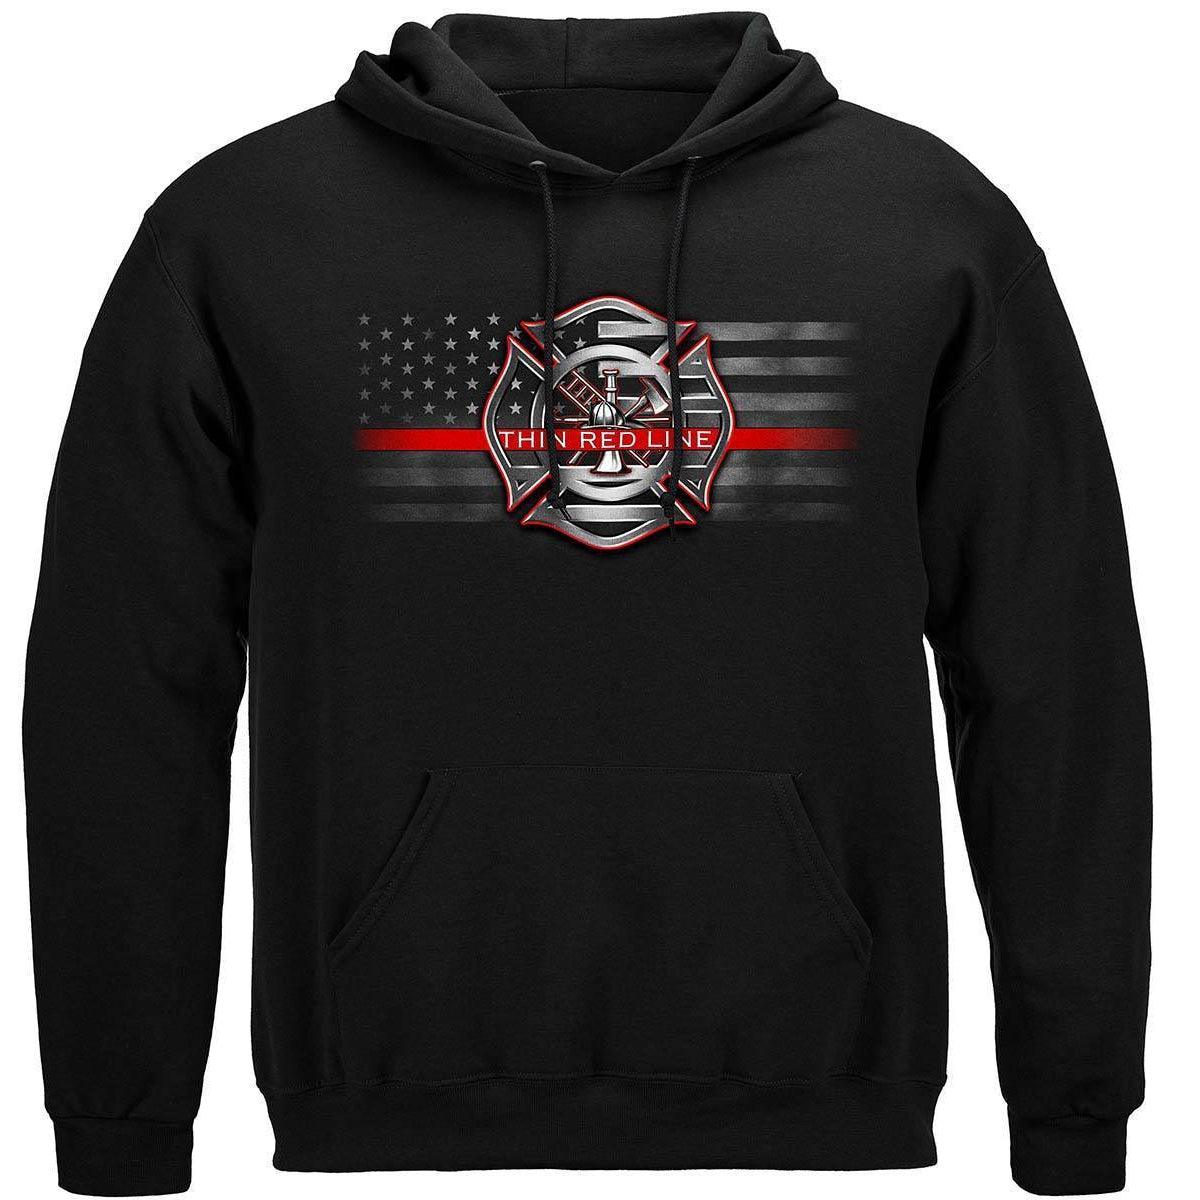 Firefighter I Stand for the Flag kneel for the fallen Premium Long Sleeve - Military Republic